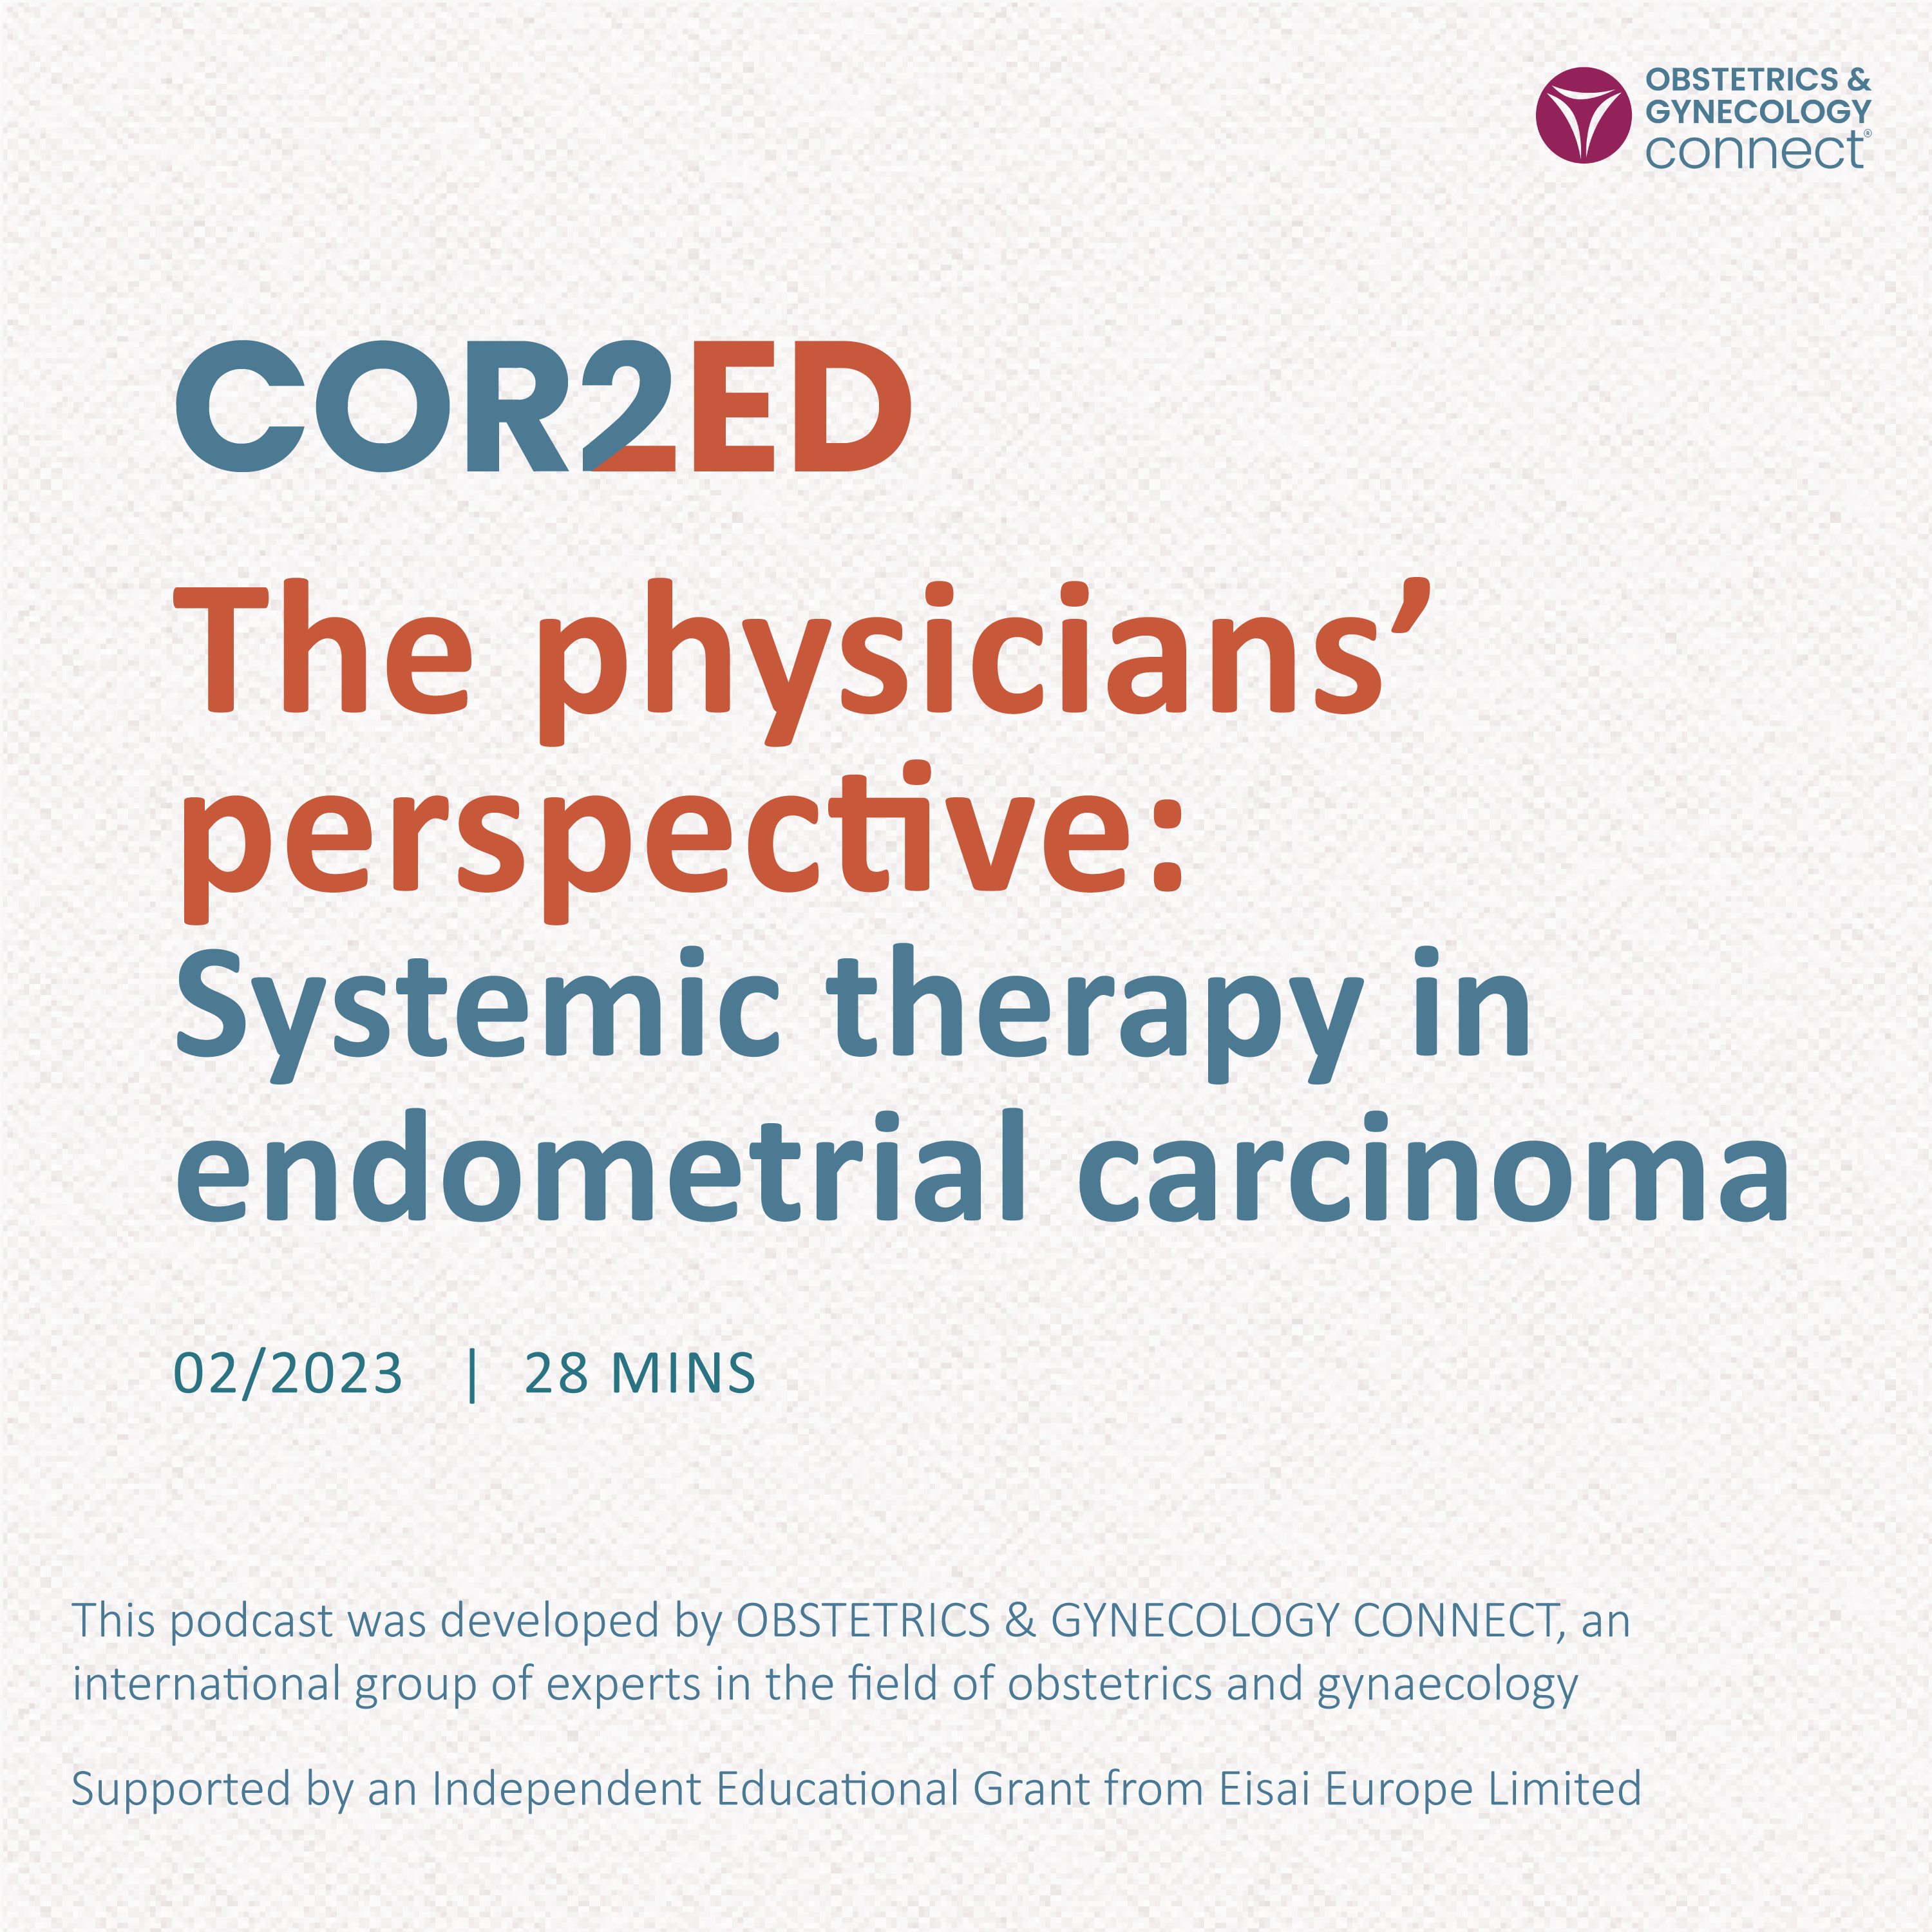 The physicians’ perspective: Systemic therapy in endometrial carcinoma